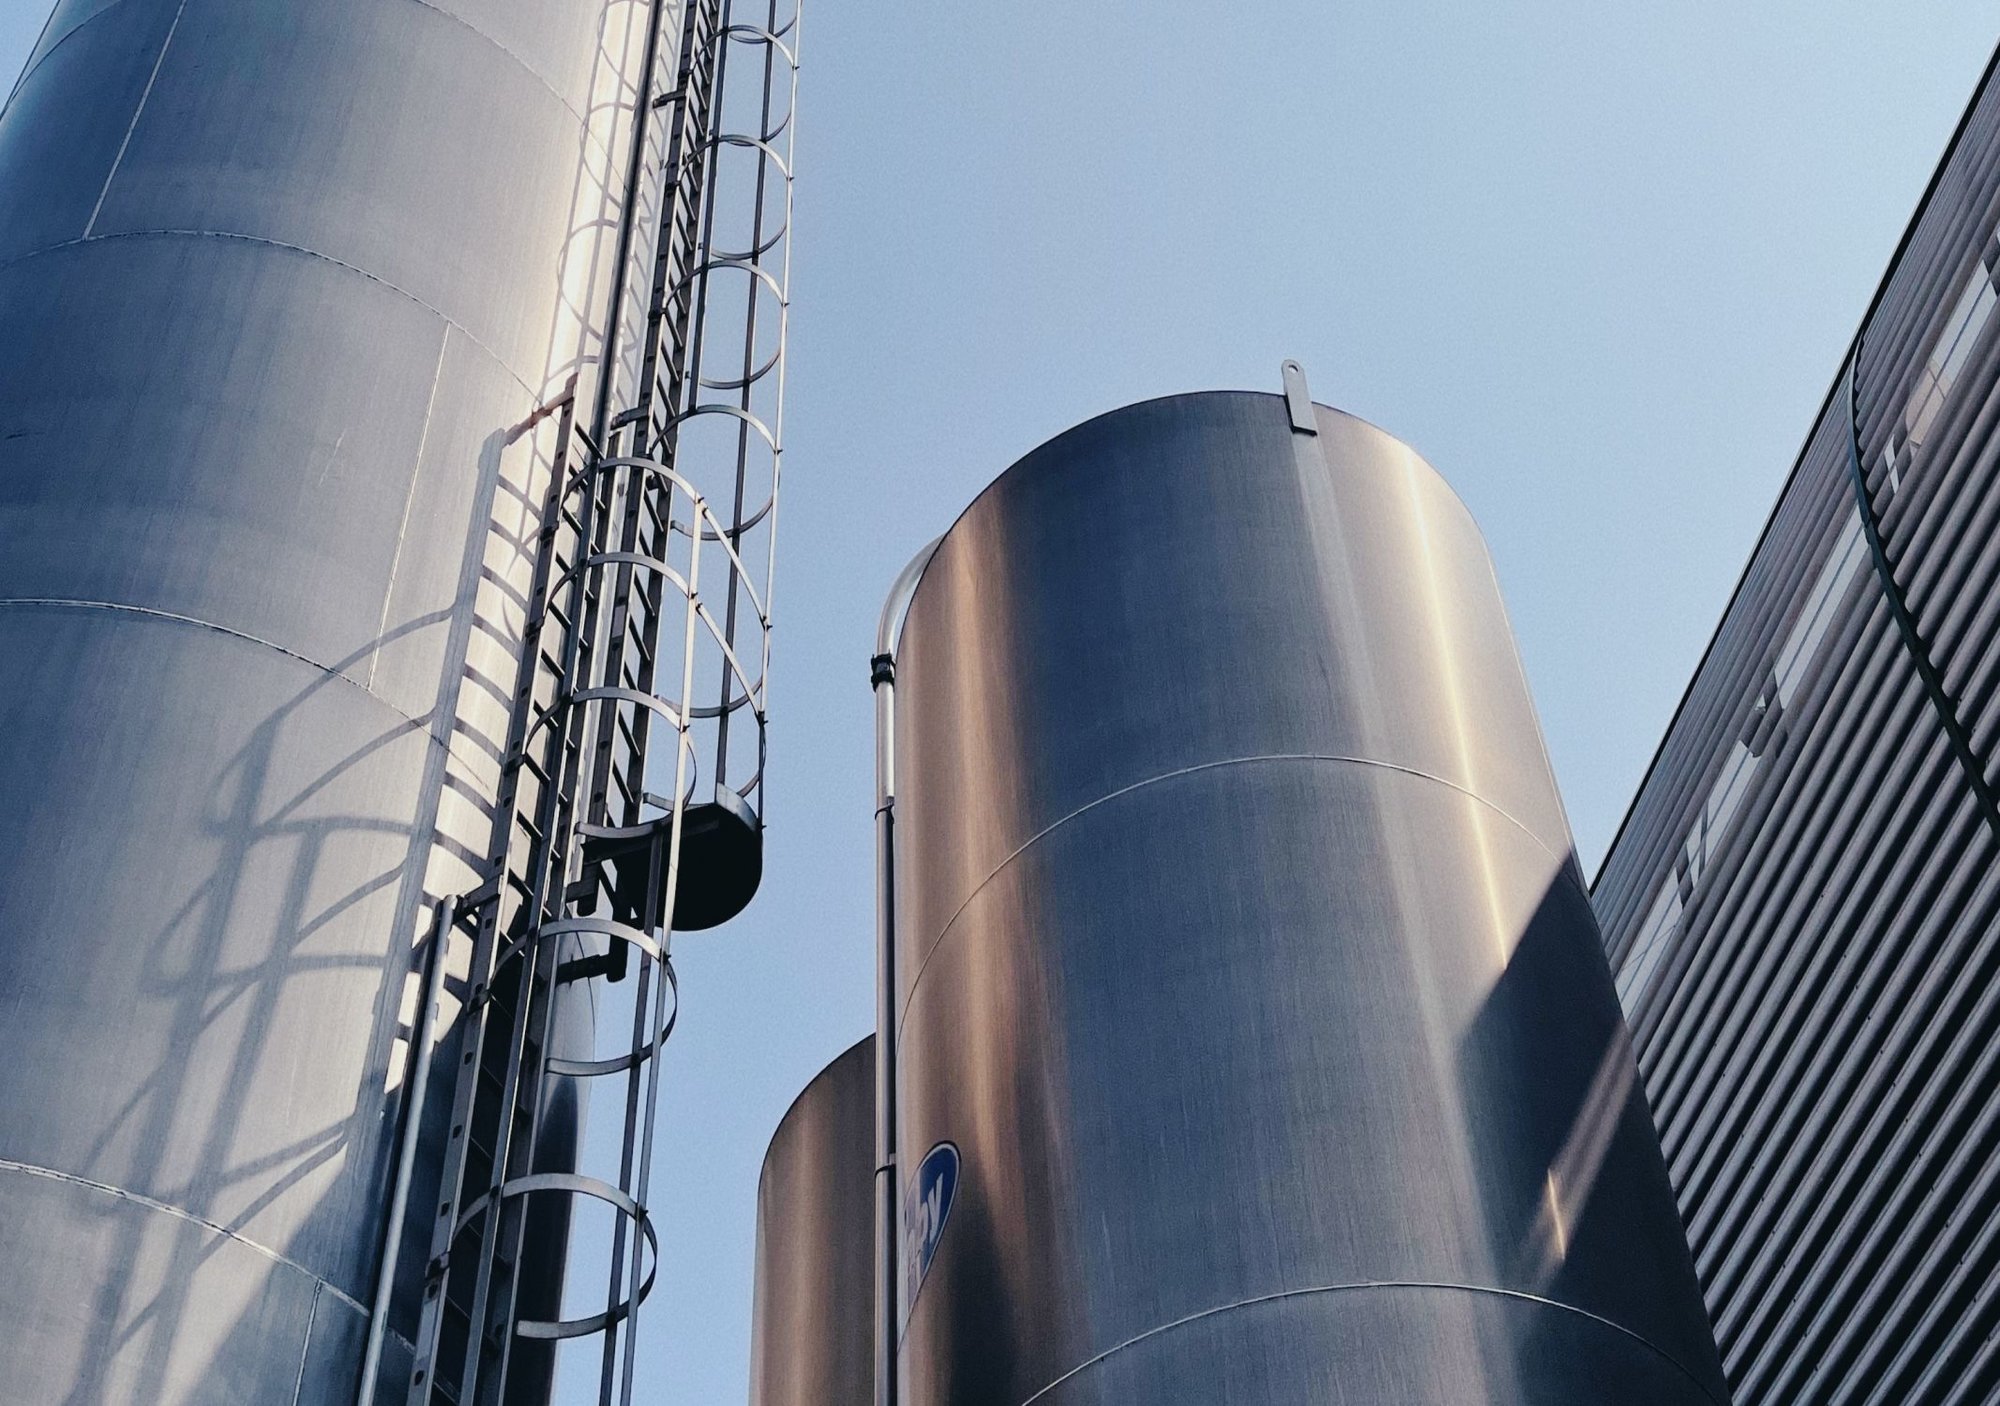 Tall metal silos with ladders set against a blue sky